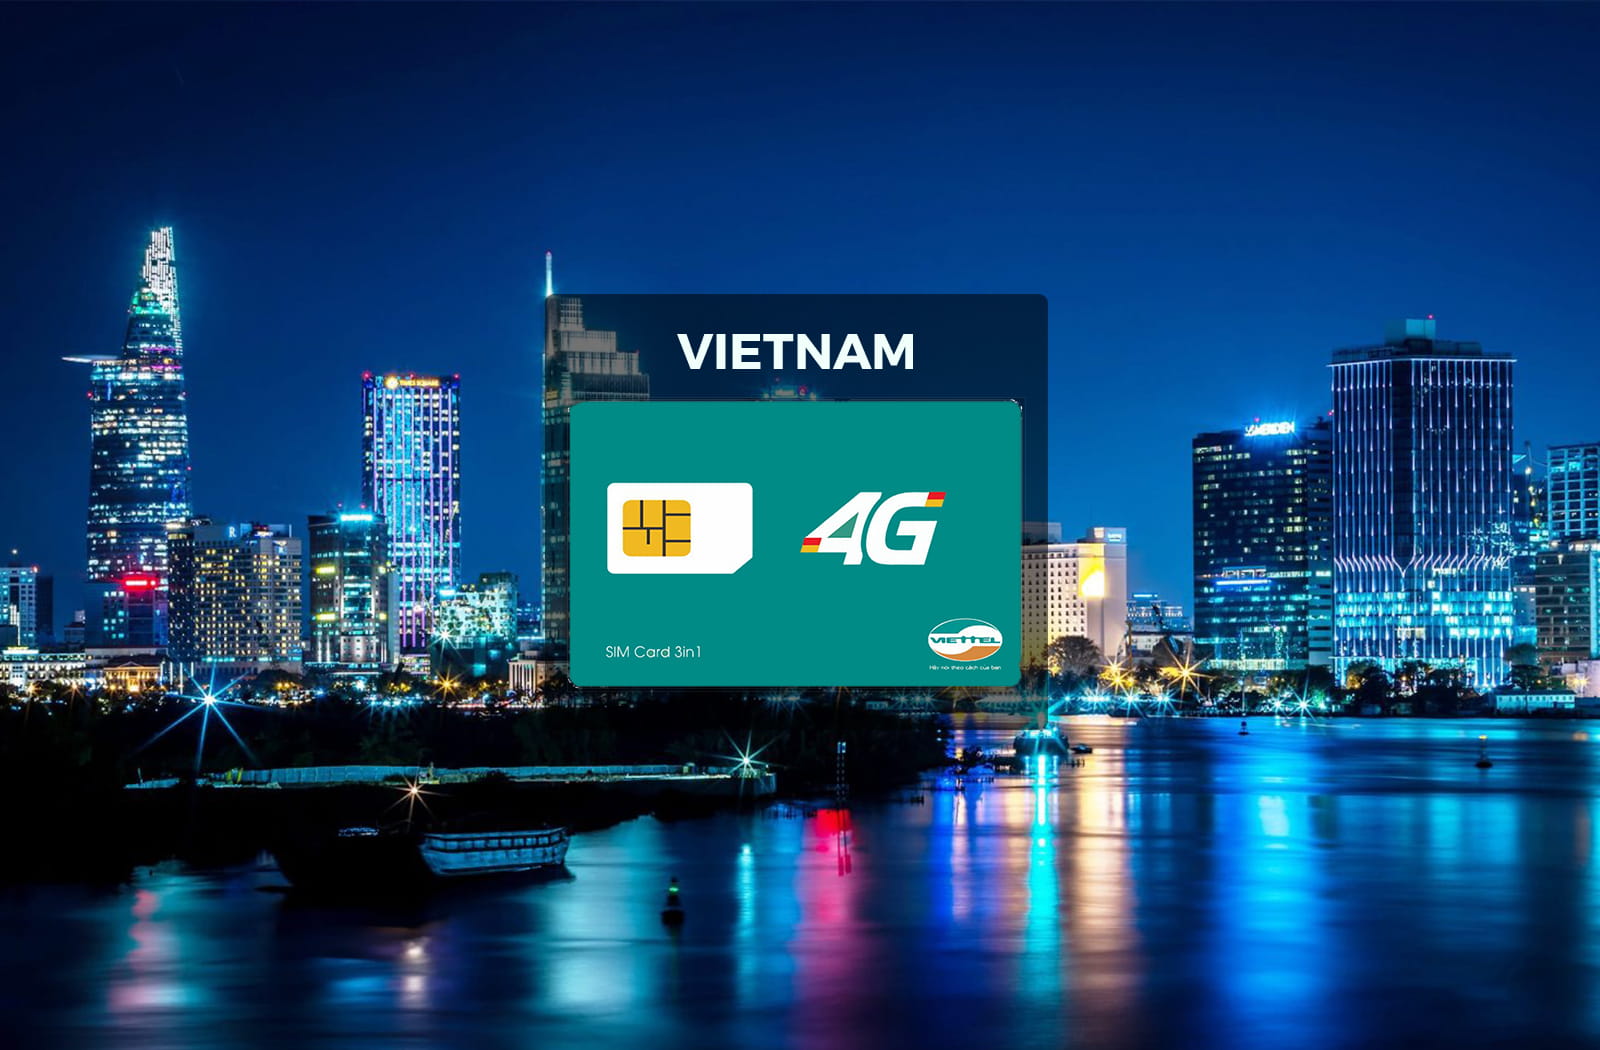 Highlight Vietnam 4G SIM Card Viettel - 3GB Data/day within 30 days (Tan Son Nhat Airport Pickup OR Hotel Delivery)